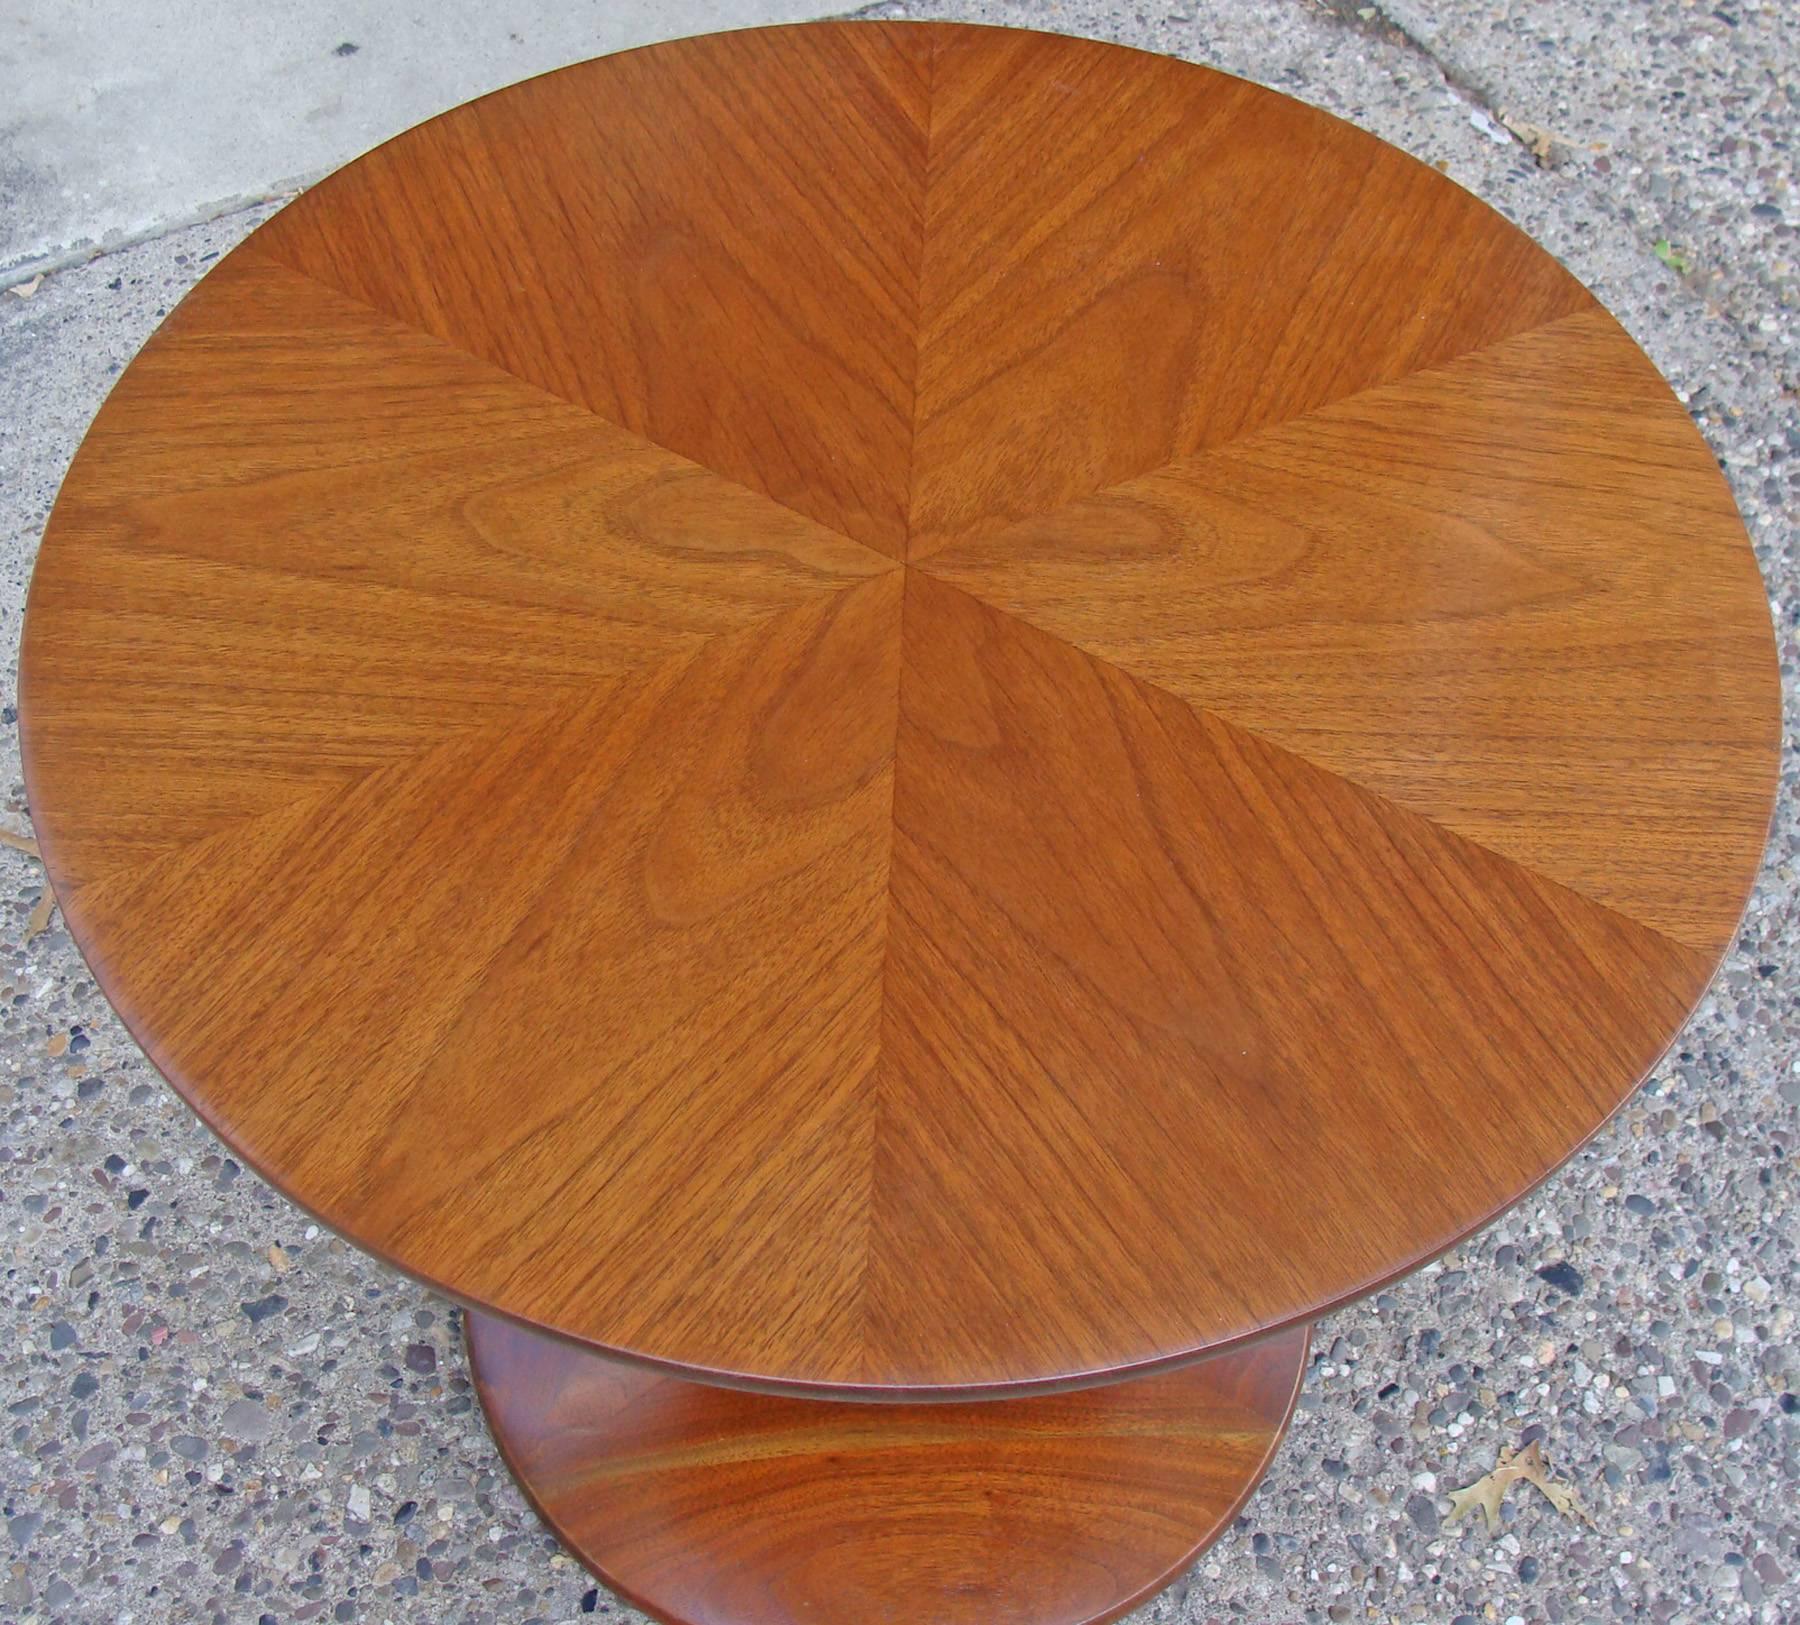 Beautiful pair of walnut side or end tables designed by Kipp Stewart for Drexel
USA and marketed within their 